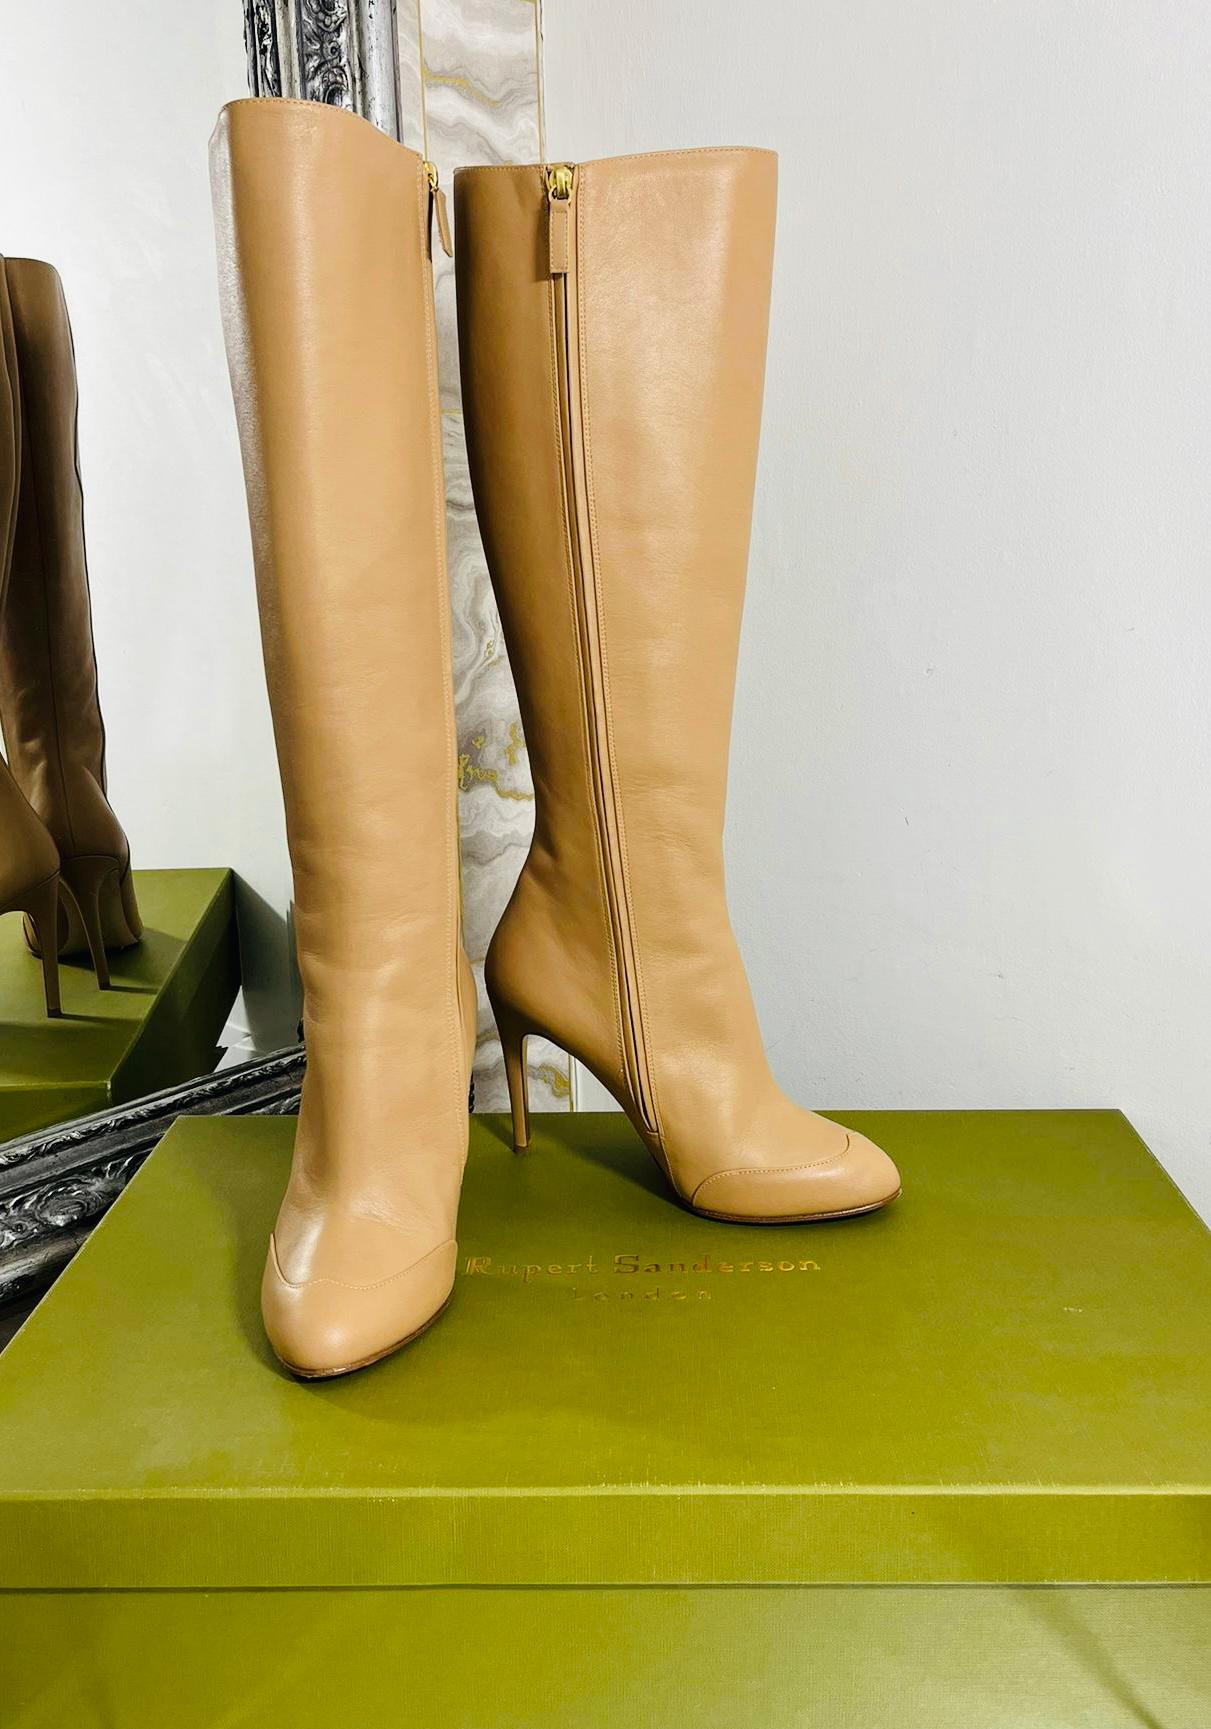 Rupert Sanderson Calfskin Knee High Boots

Beige boots designed with almond toe and stiletto heel.

Styled with decorative, tonal stitching detail to the side and toes.

Featuring zip fastening to the side. Rrp £895

Size – 38.5

Condition –